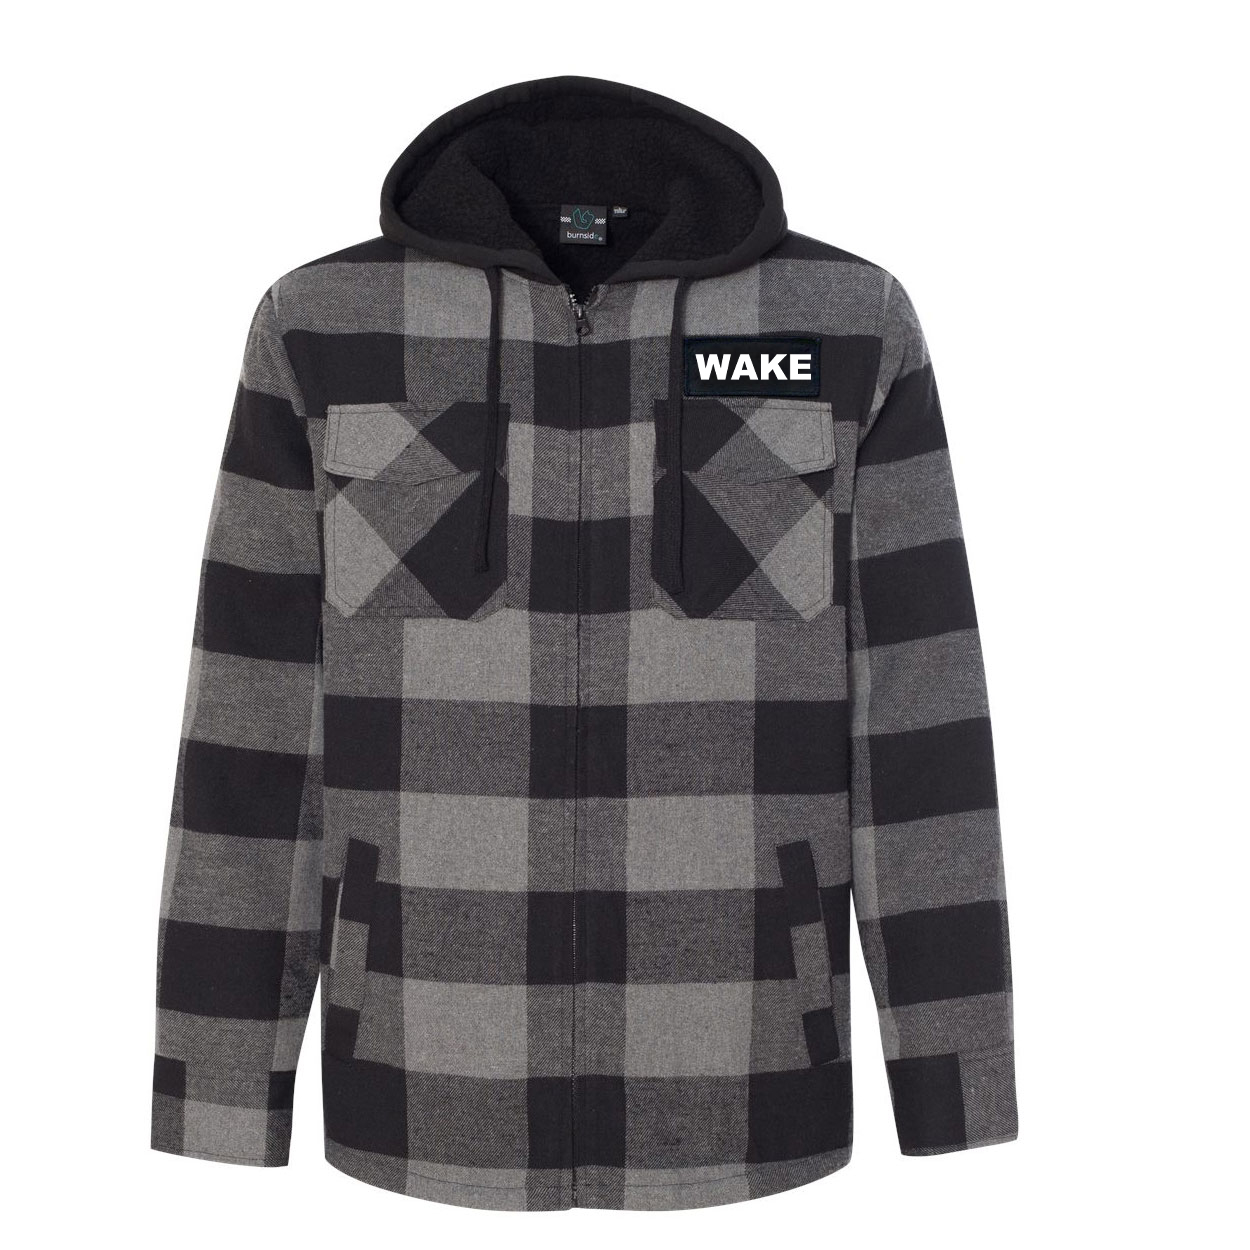 Wake Brand Logo Classic Unisex Full Zip Woven Patch Hooded Flannel Jacket Black/Gray